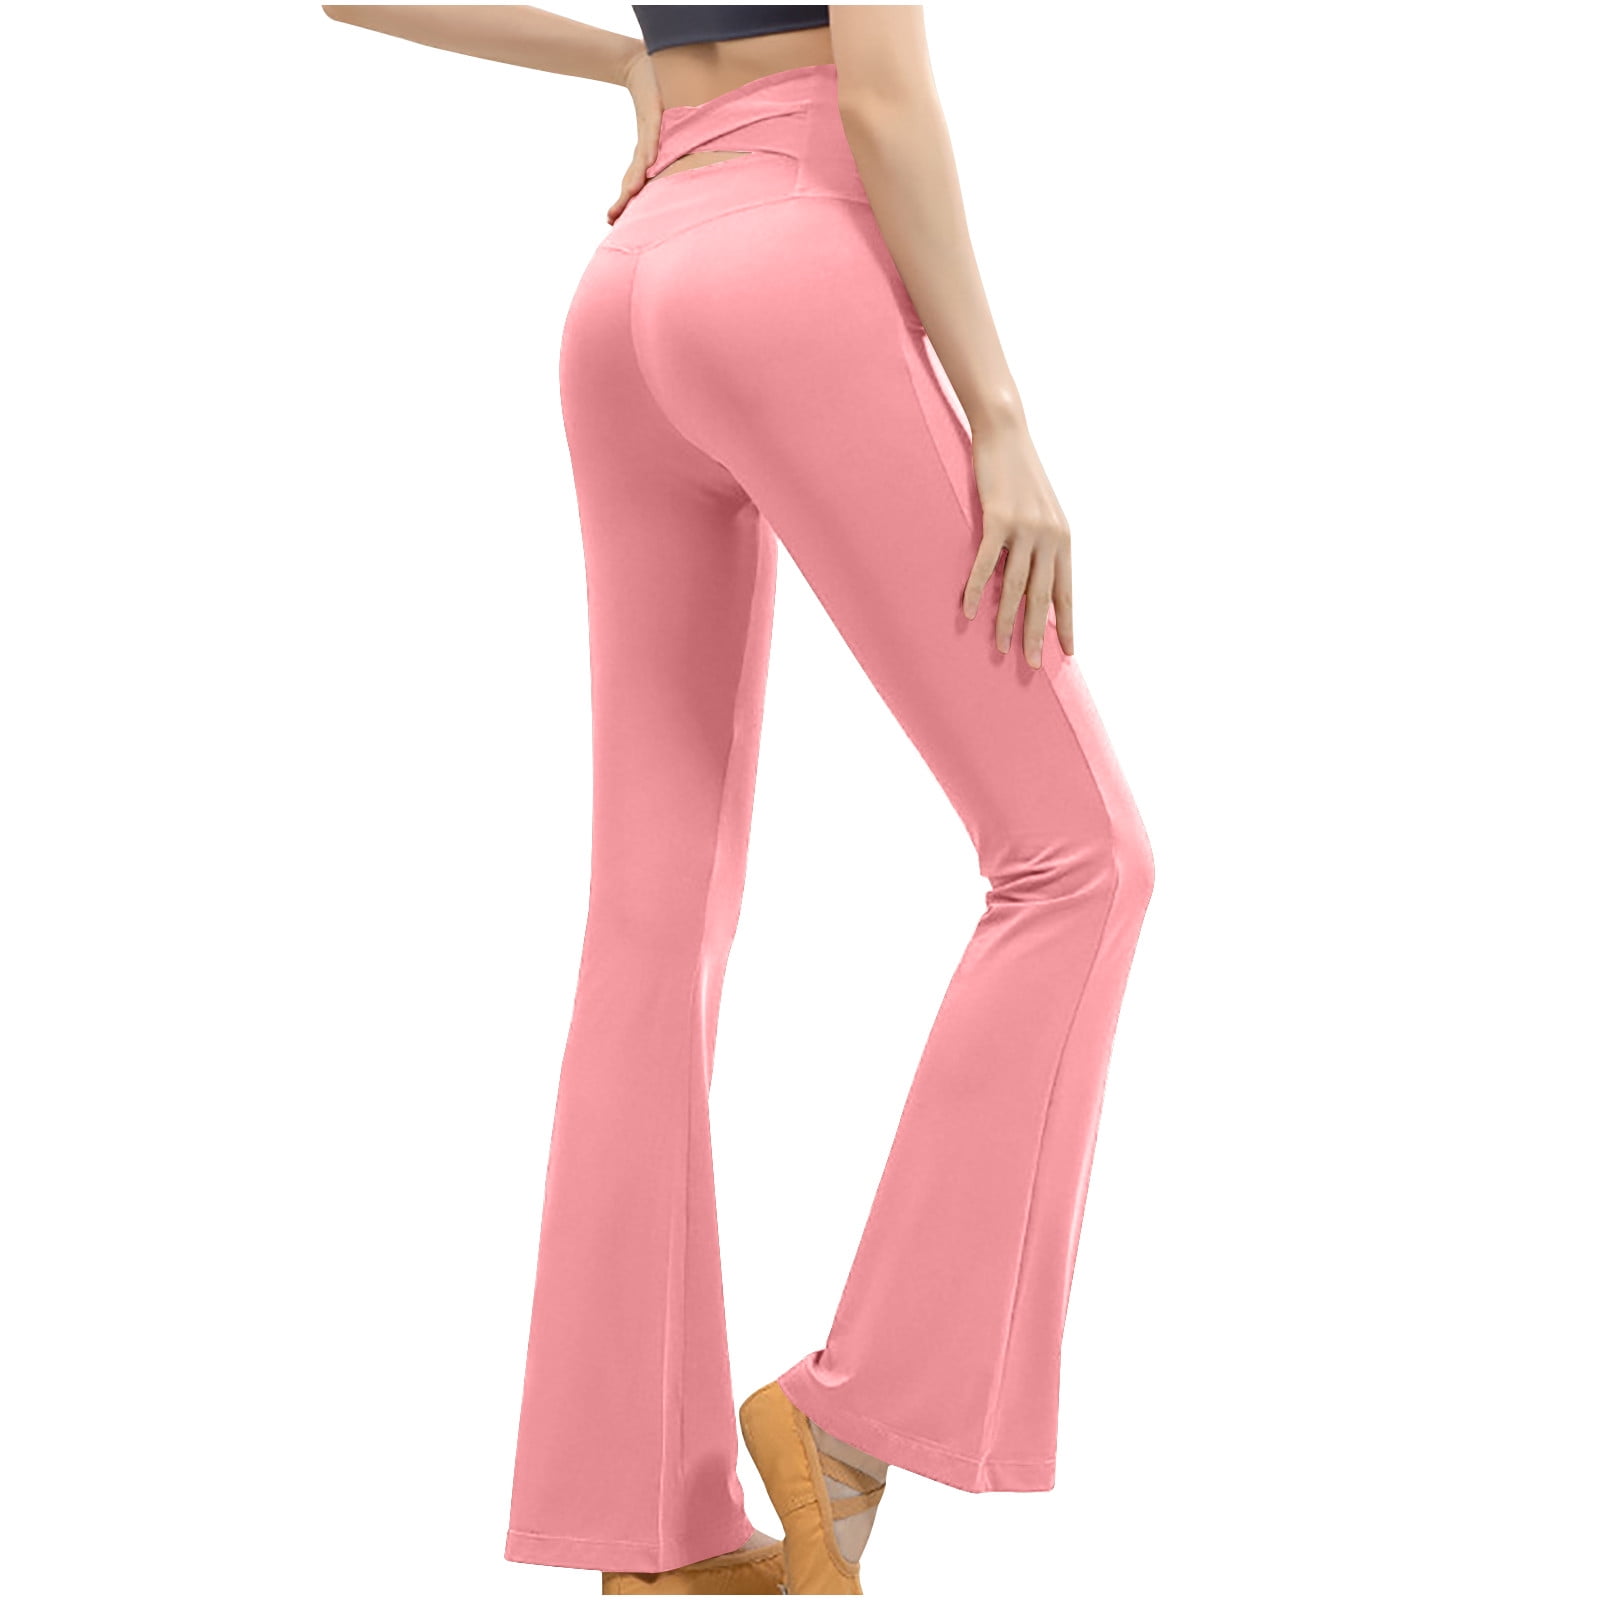 Plus Size Pants for Women Women's Solid Color Micro Flare High